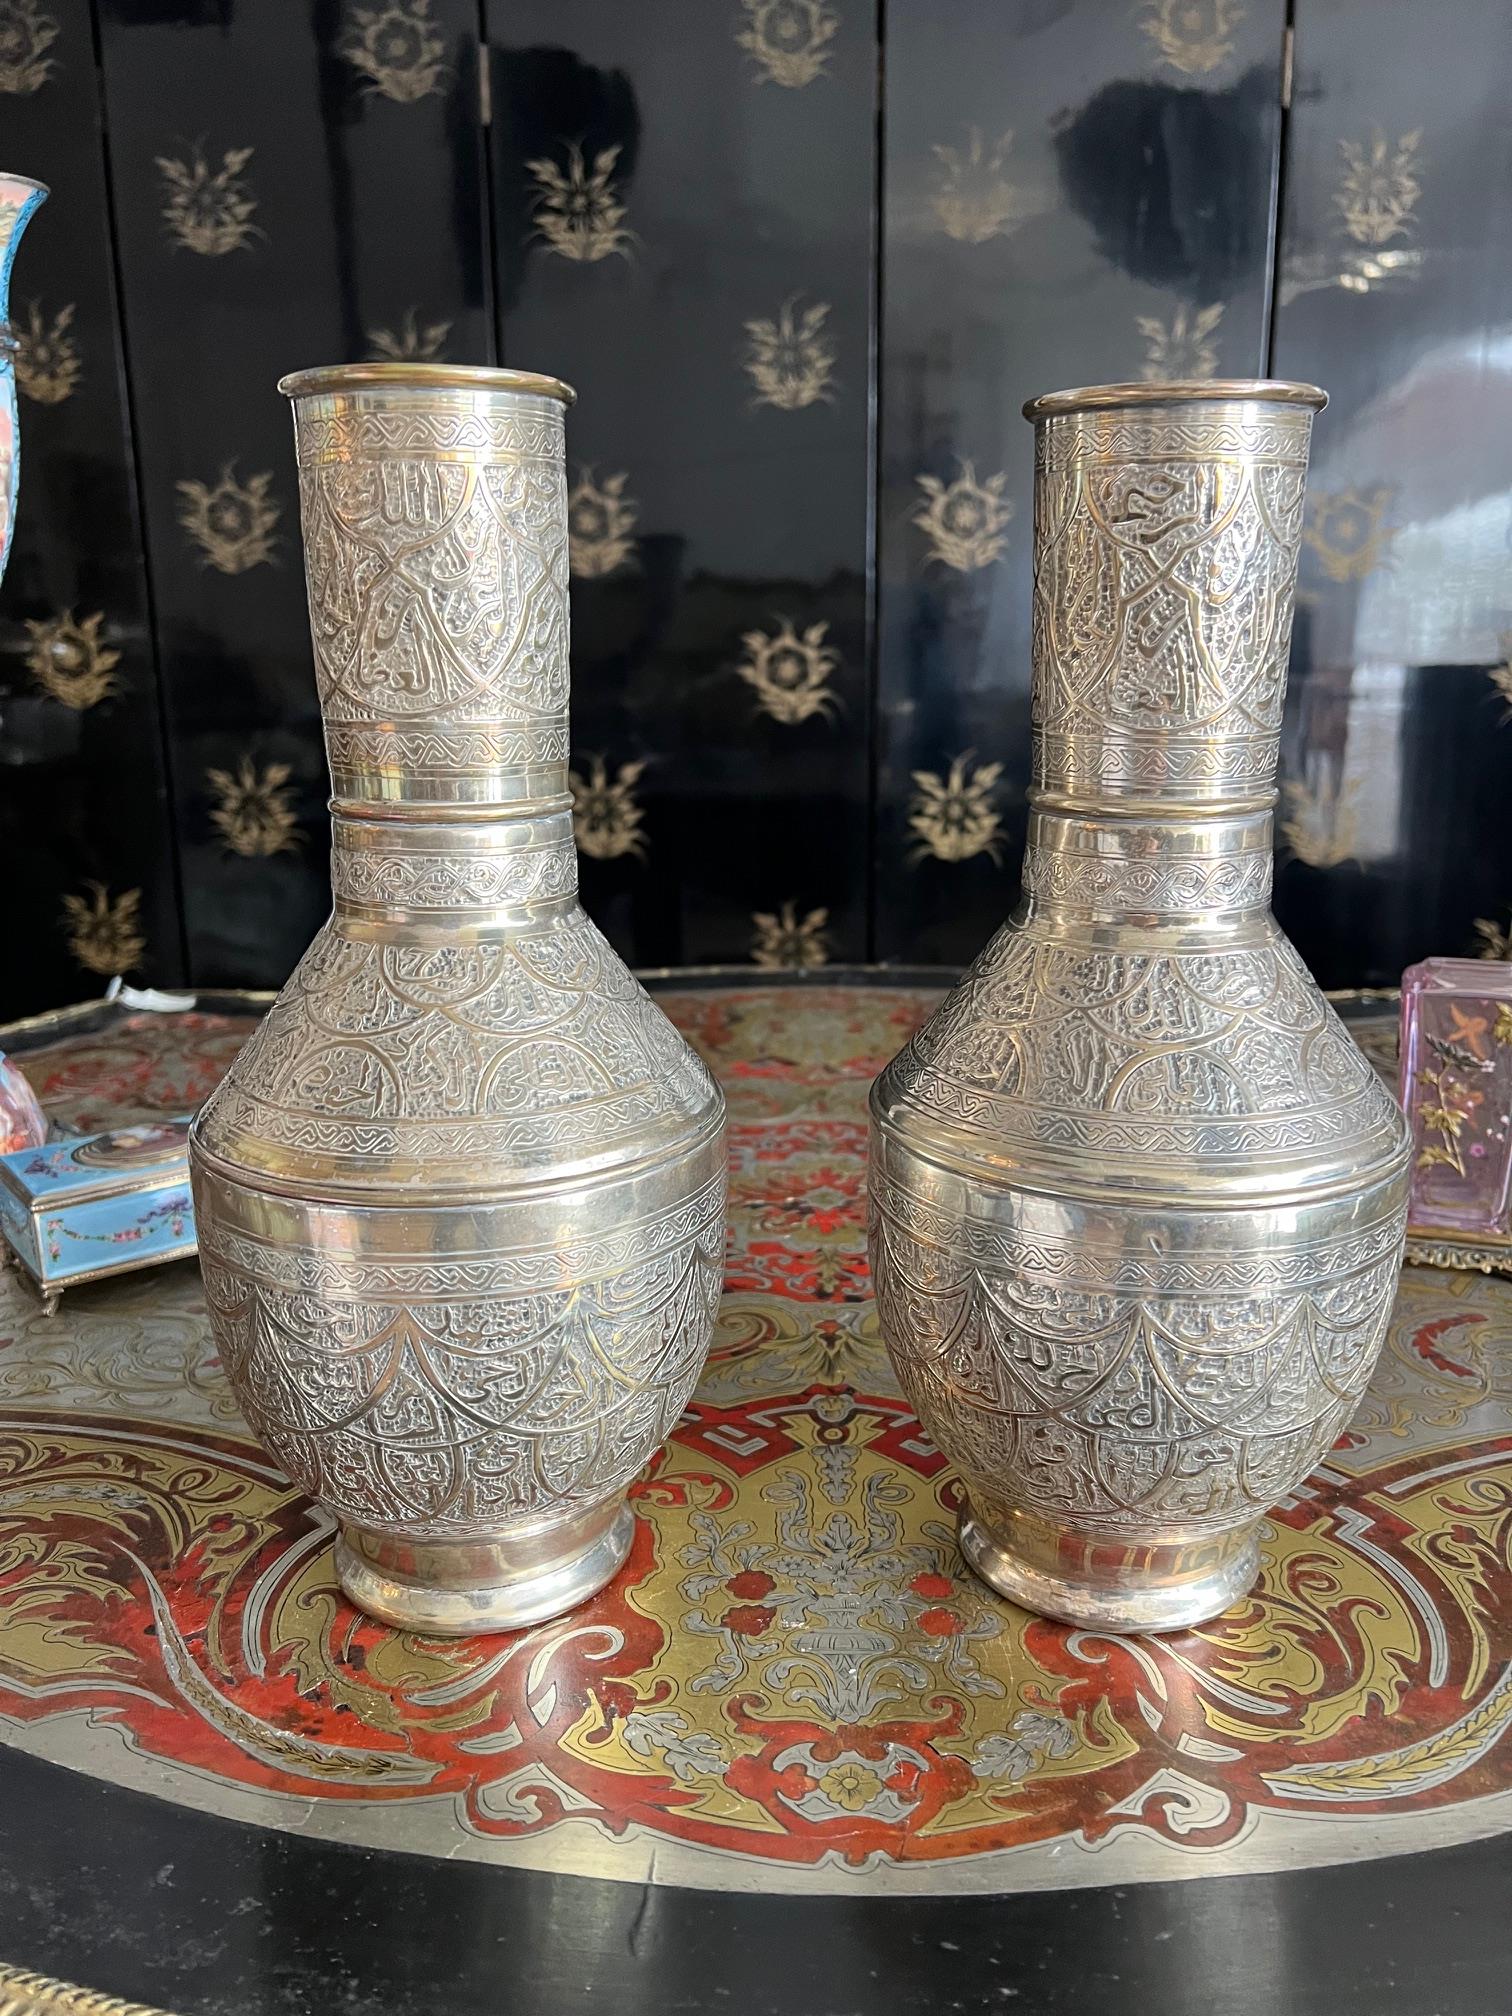 A PAIR OF SILVER ISLAMIC CALLIGRAPHIC VASES - Image 9 of 9